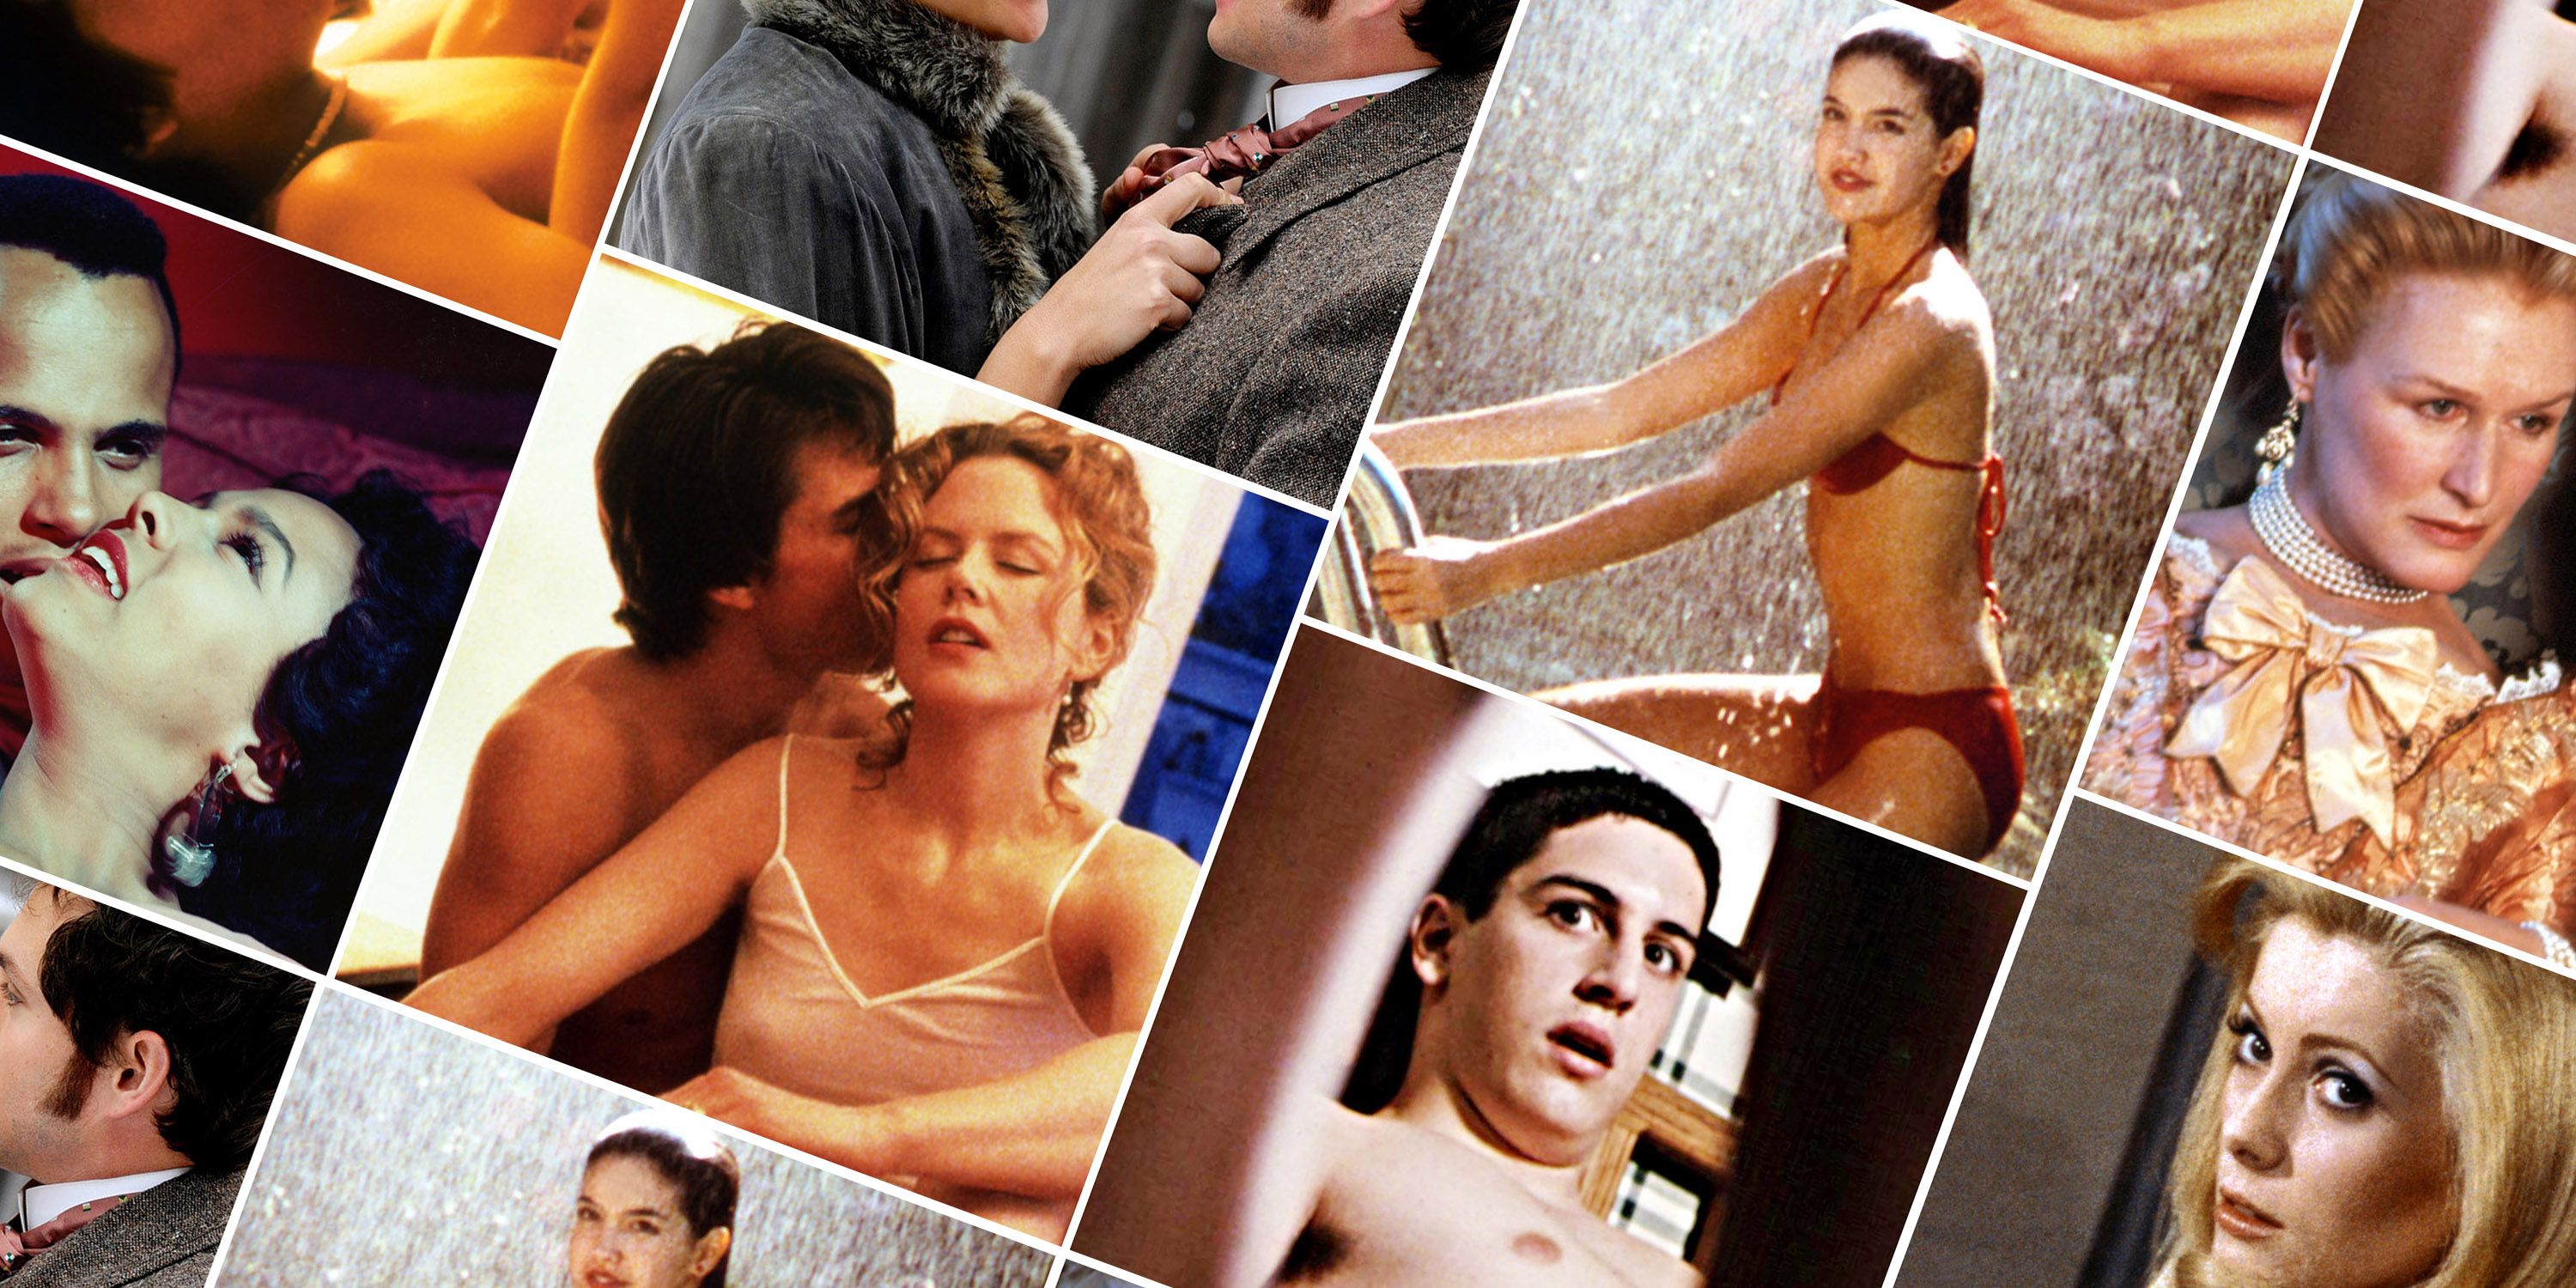 Nudist Life France - 25 Best Movies About Sex of All Time - Hottest Sex Films ...